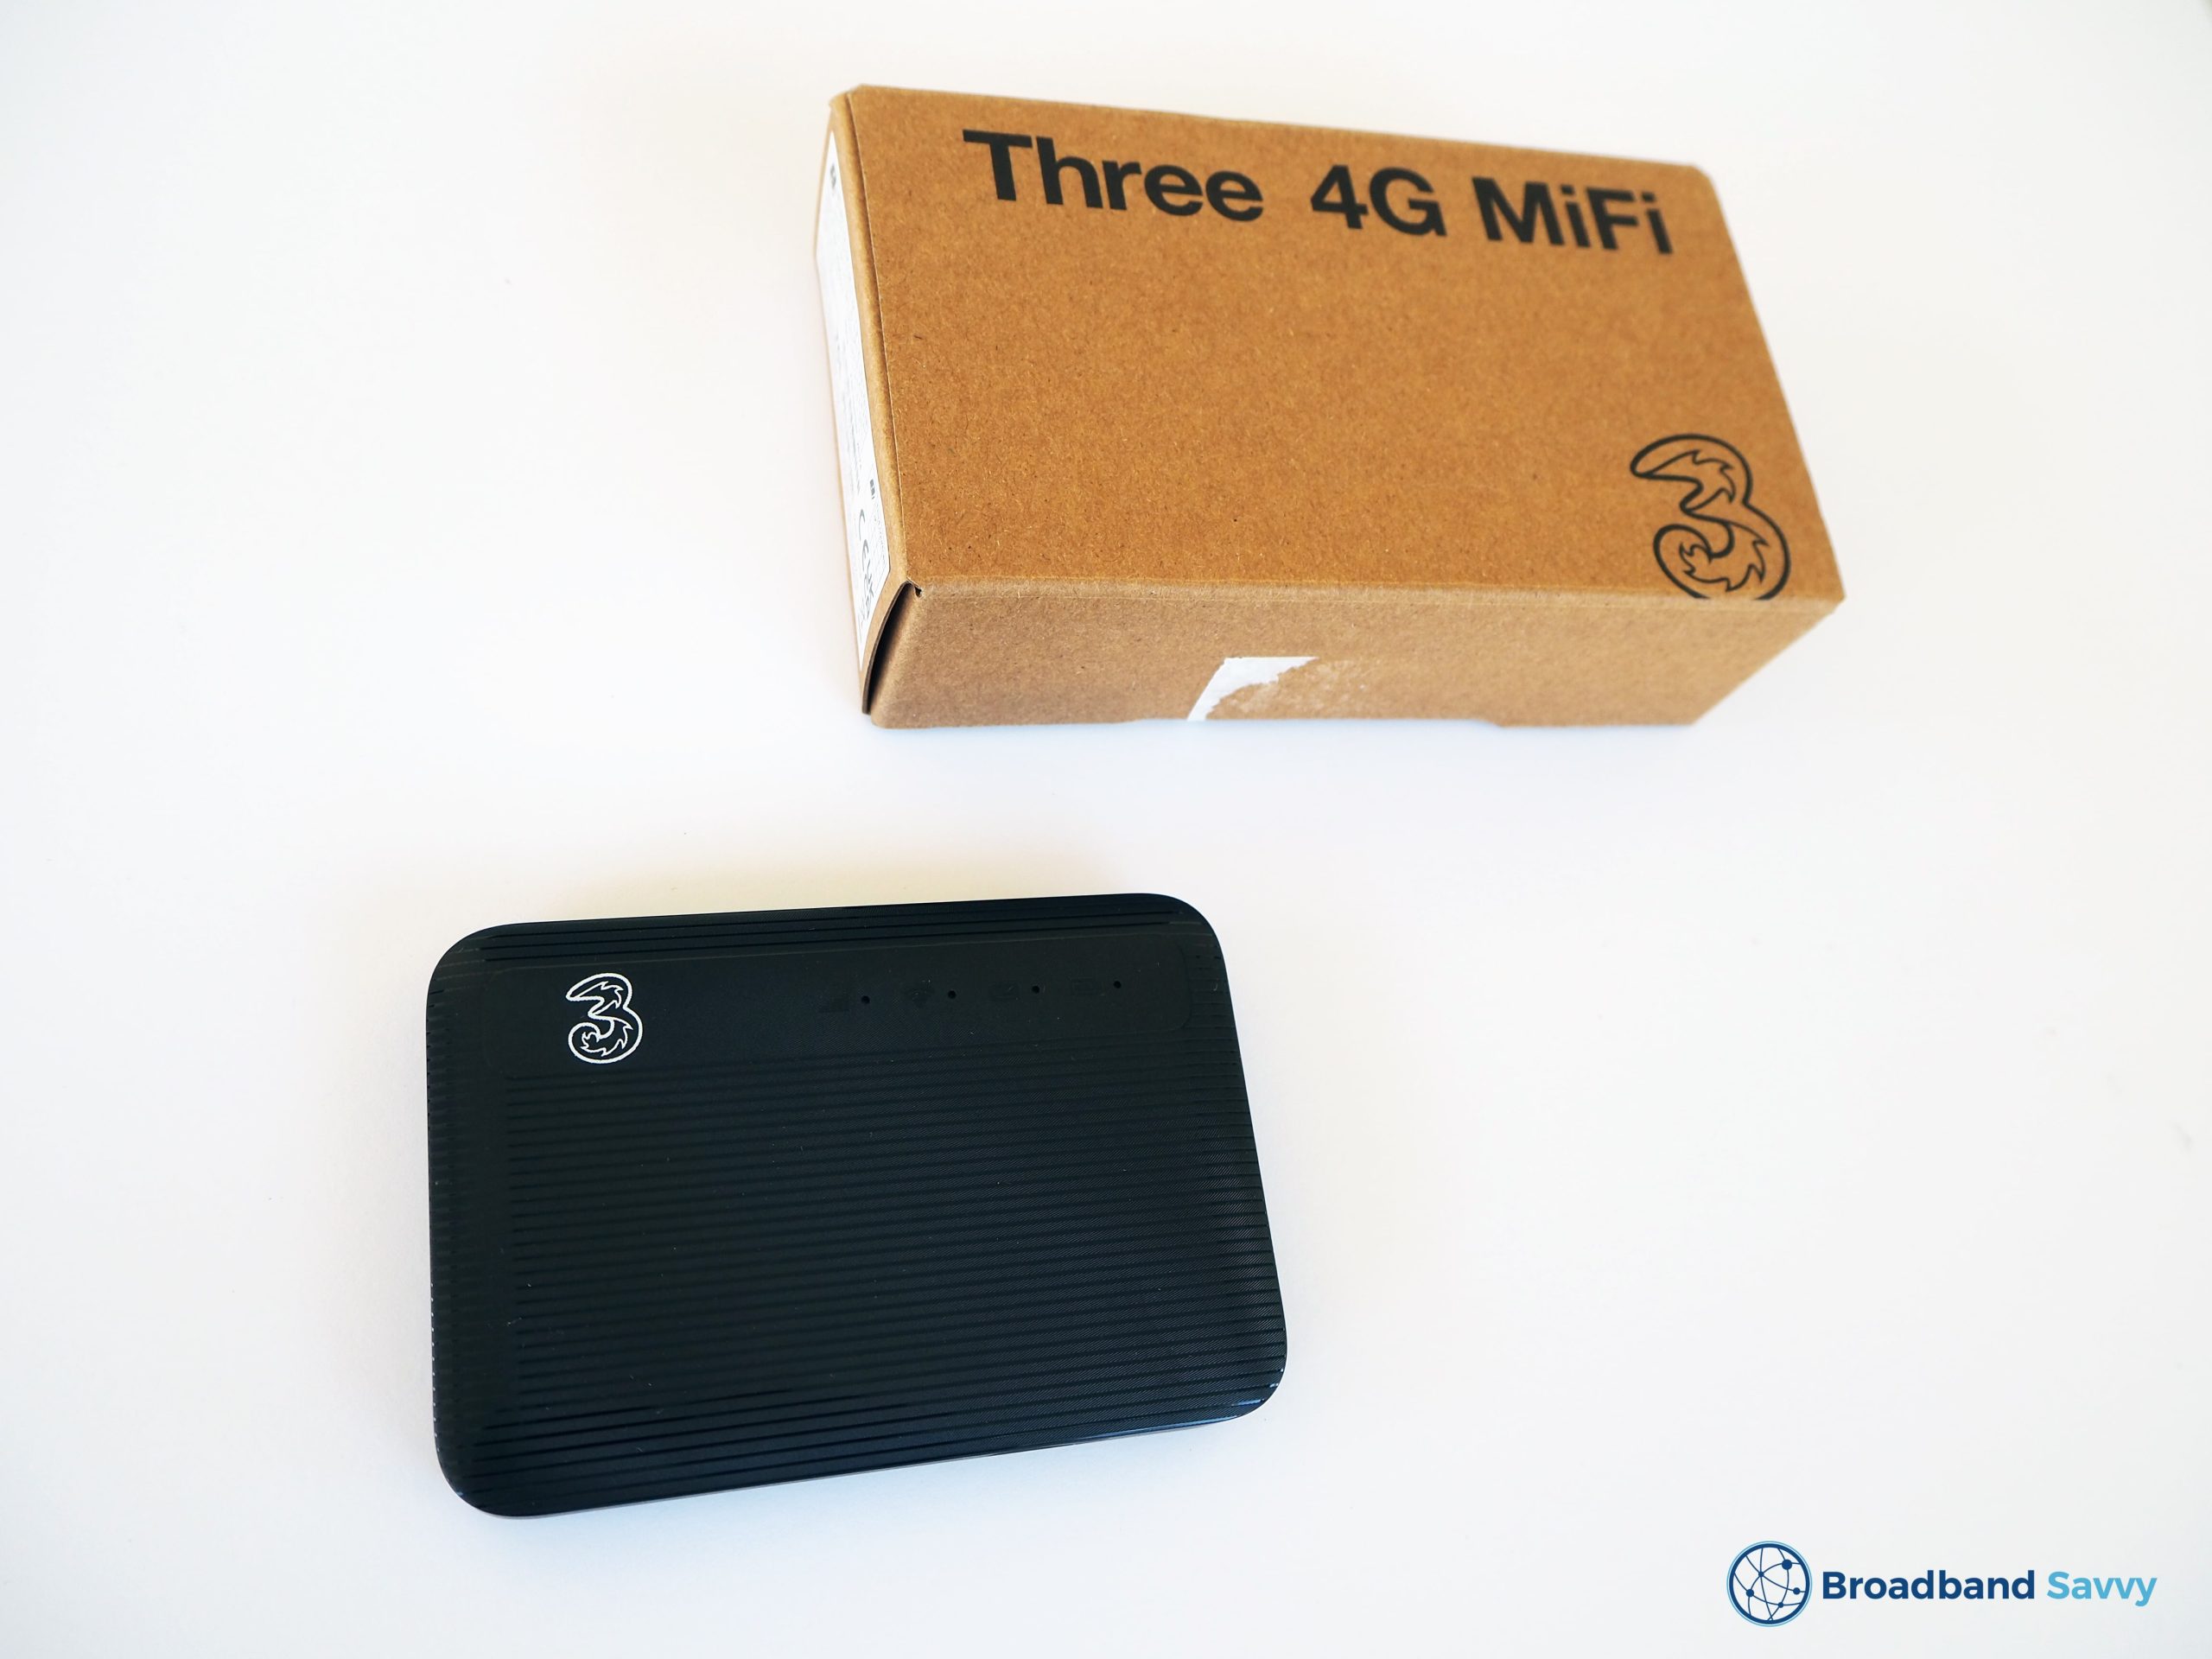 Three mobile Wi-Fi device with box.